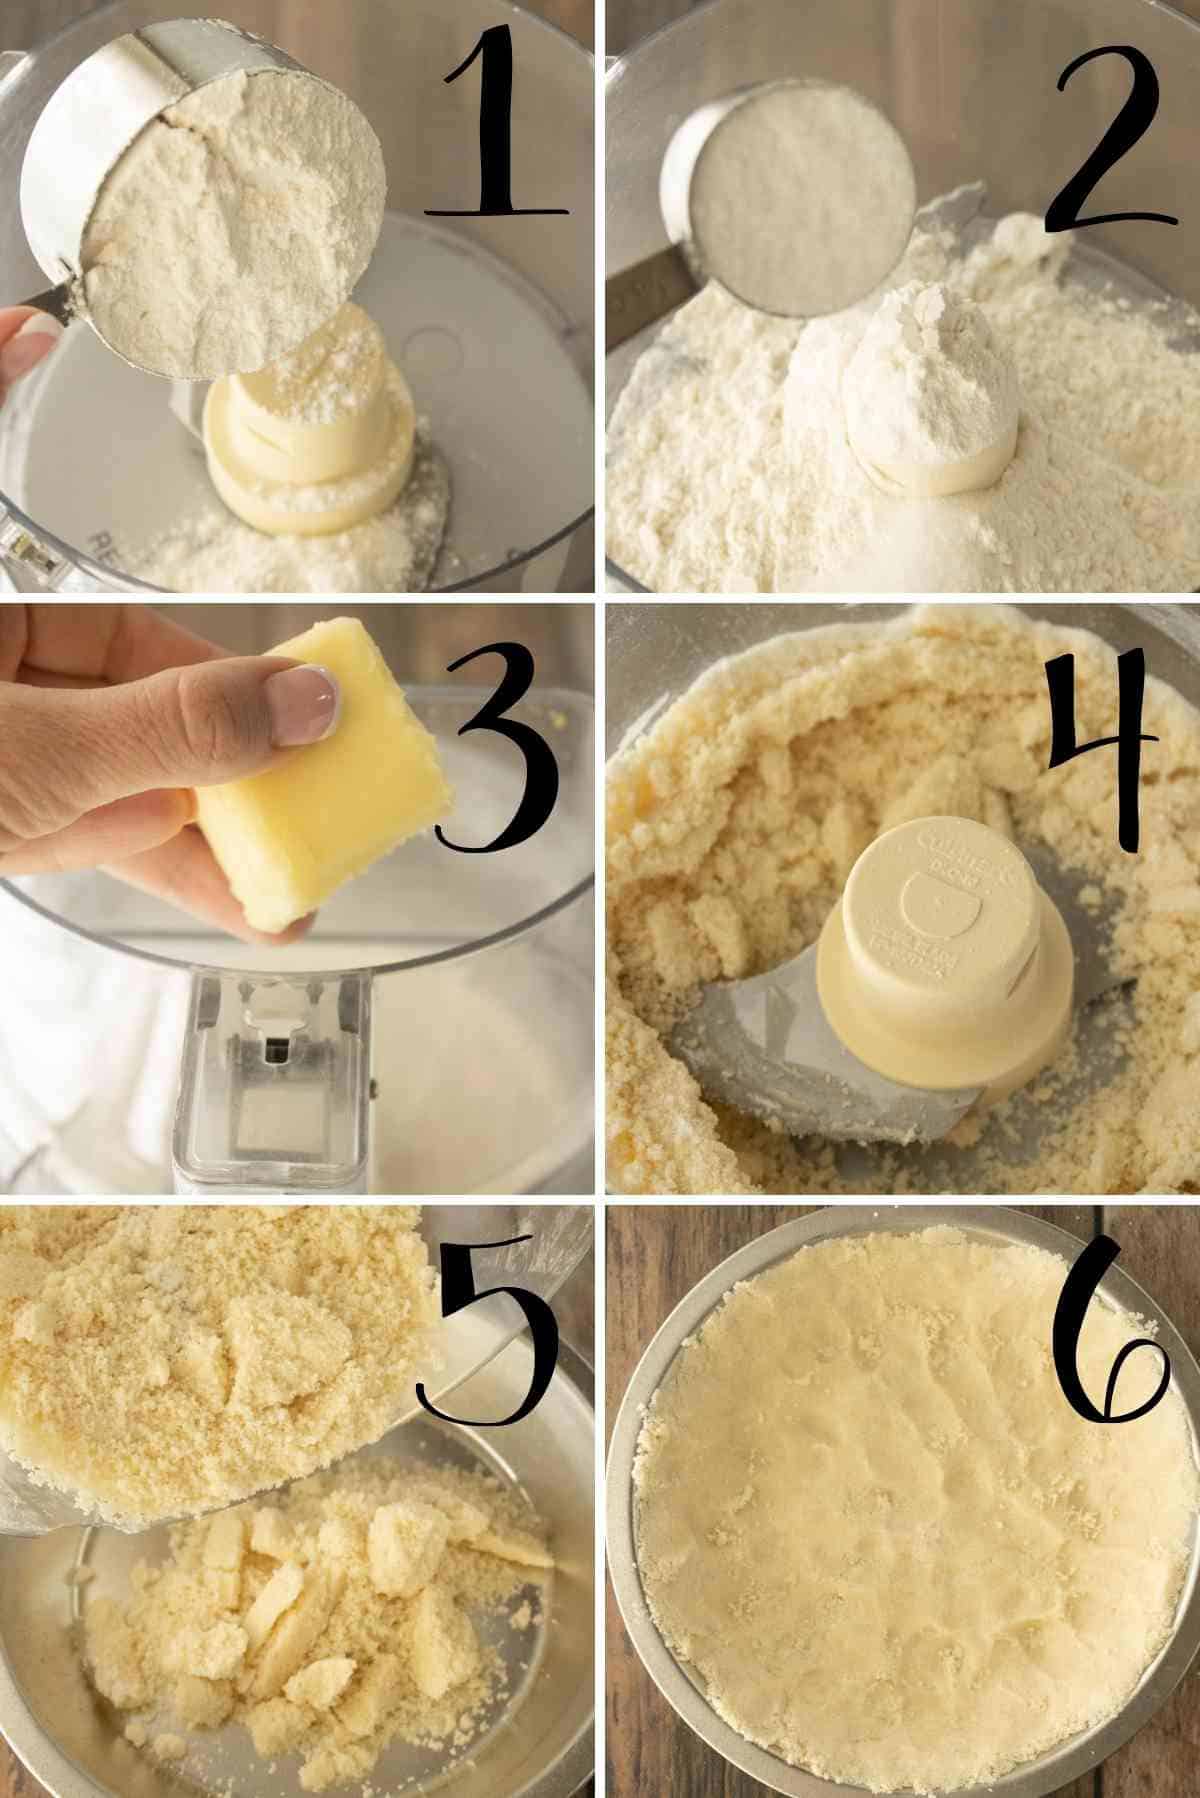 How to make the shortbread crust.